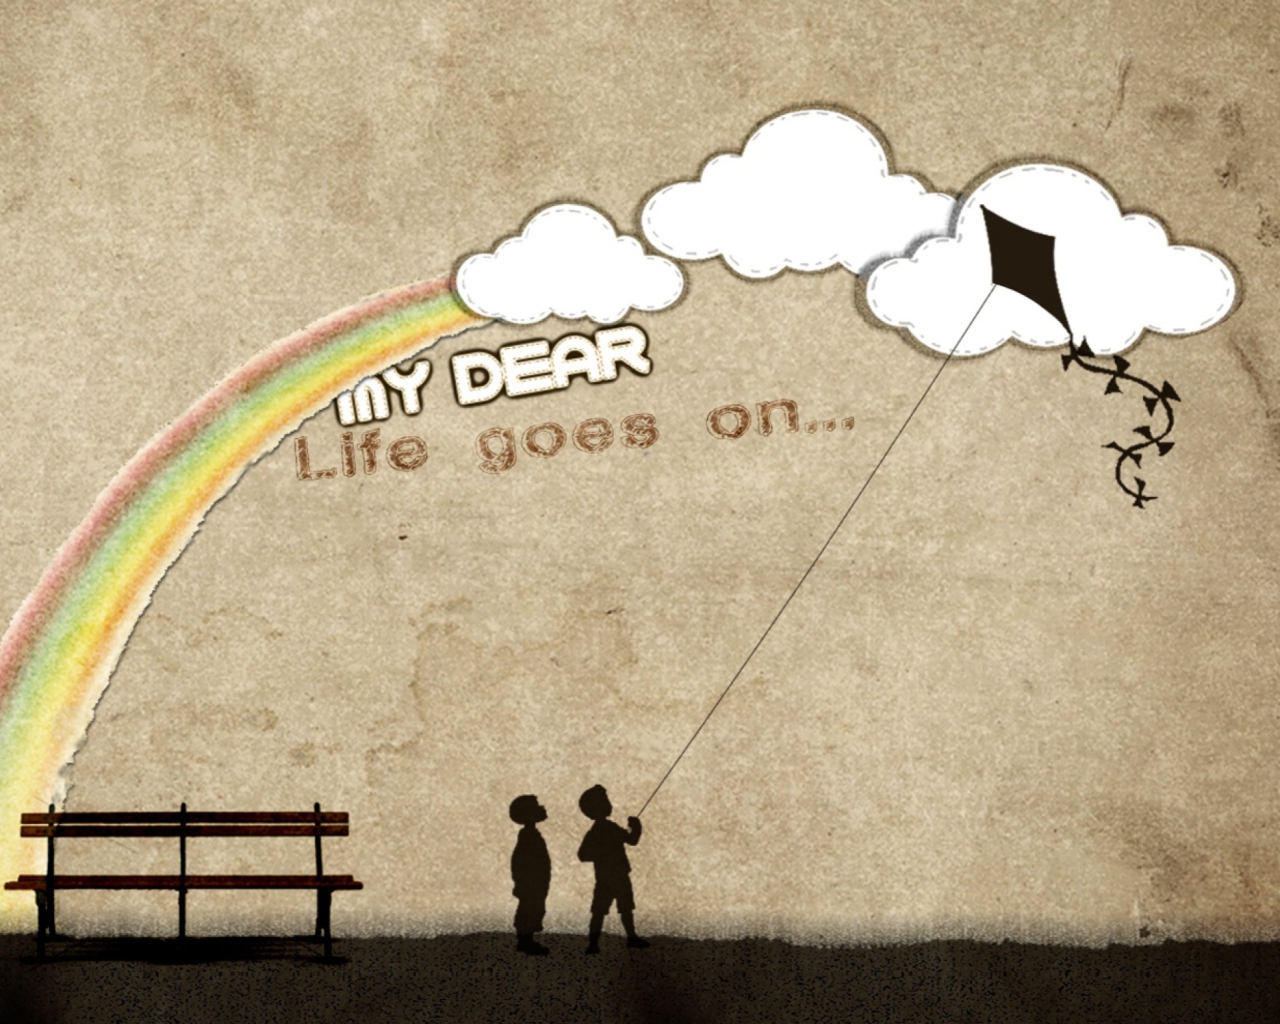 Life Goes On wallpaper 1280x1024